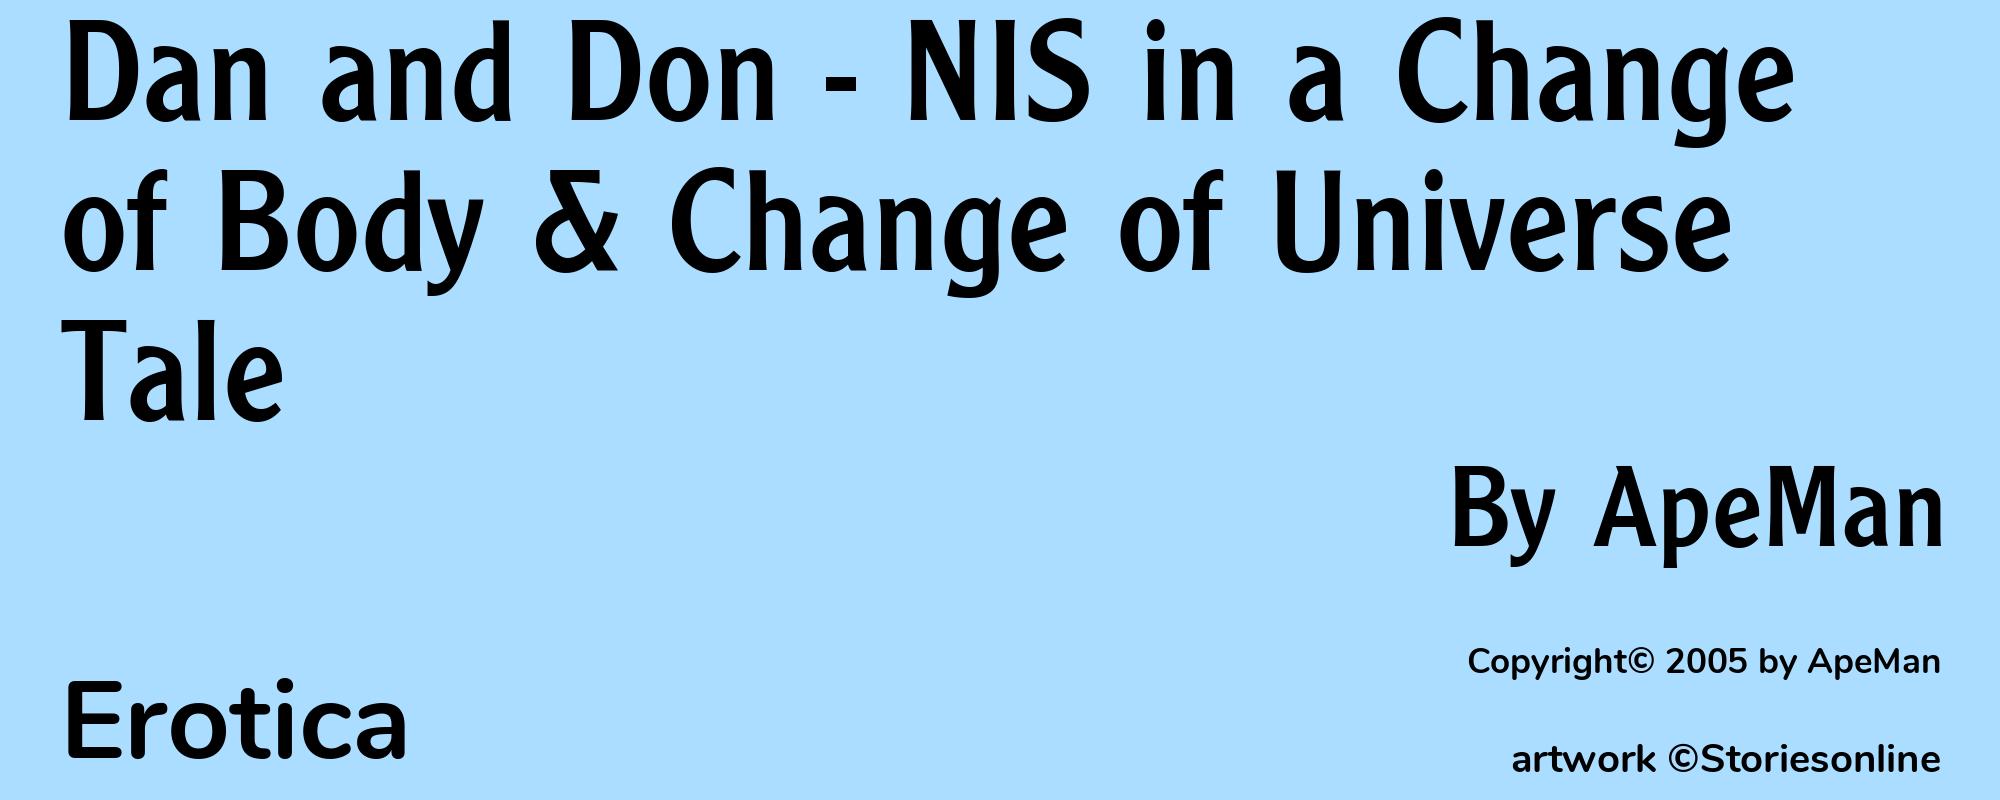 Dan and Don - NIS in a Change of Body & Change of Universe Tale - Cover